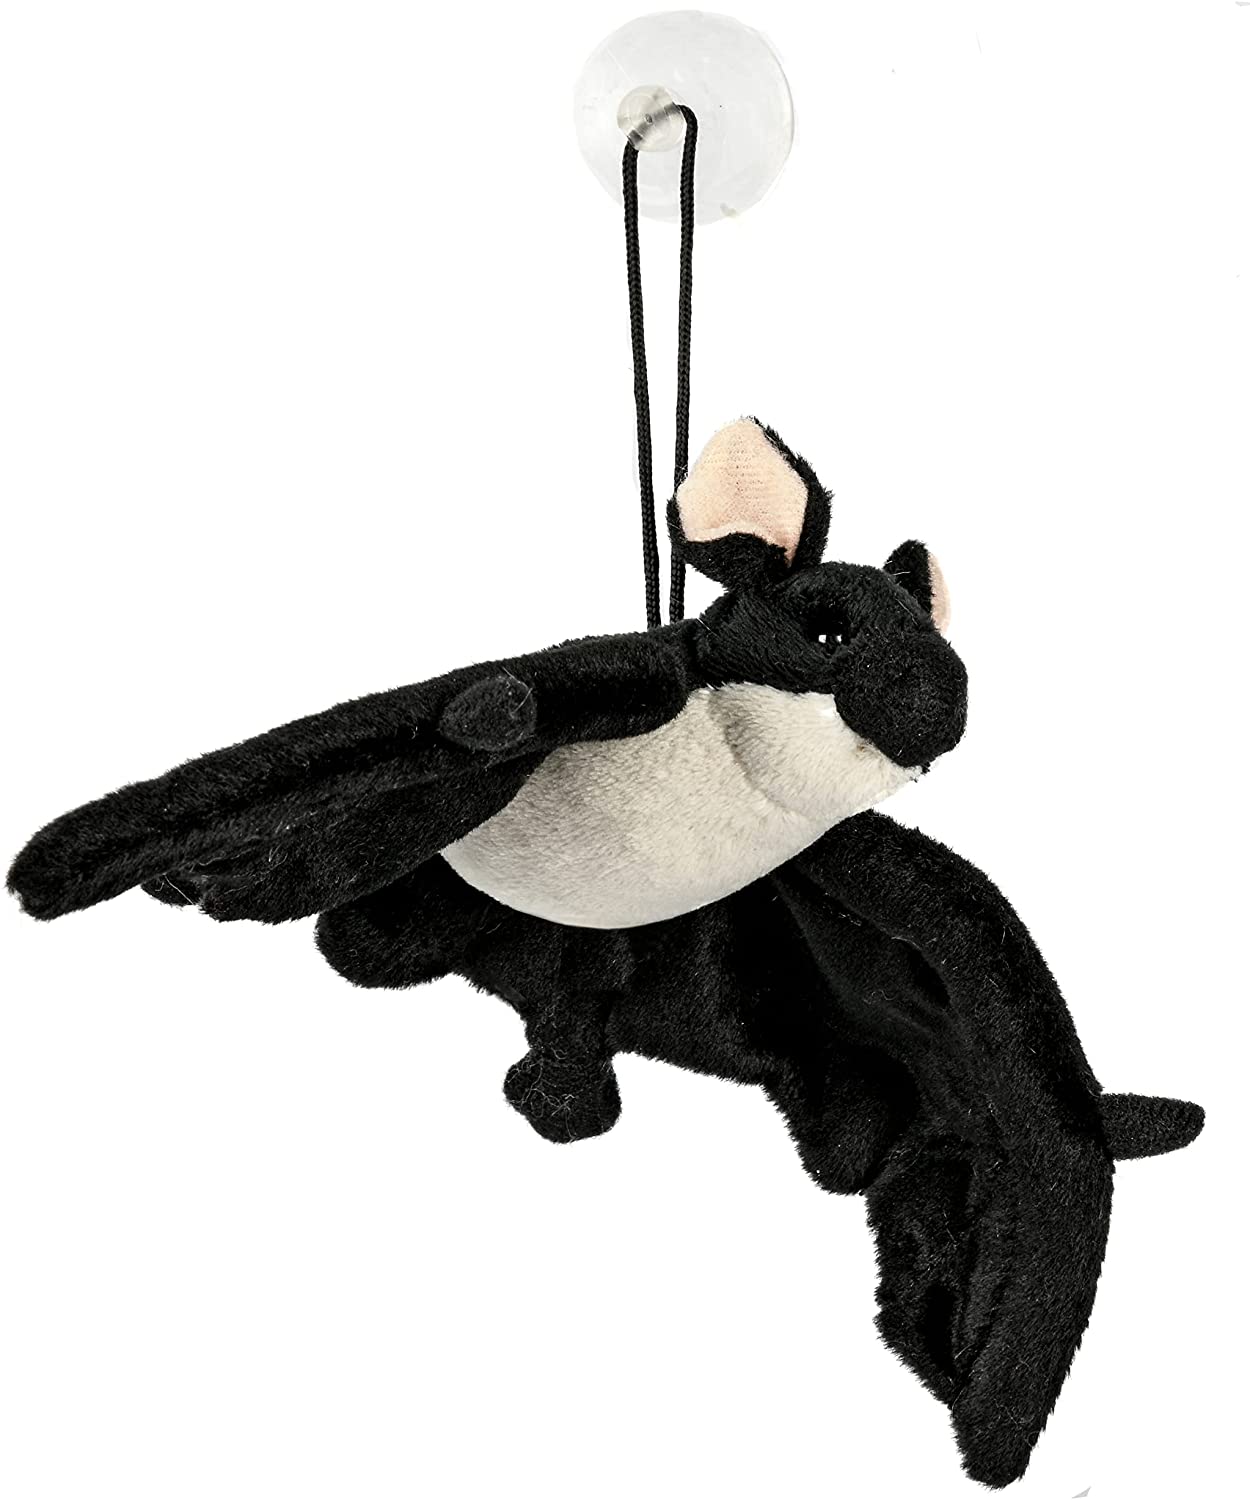 Bat (black and white) - With suction cup - 23 cm (width)